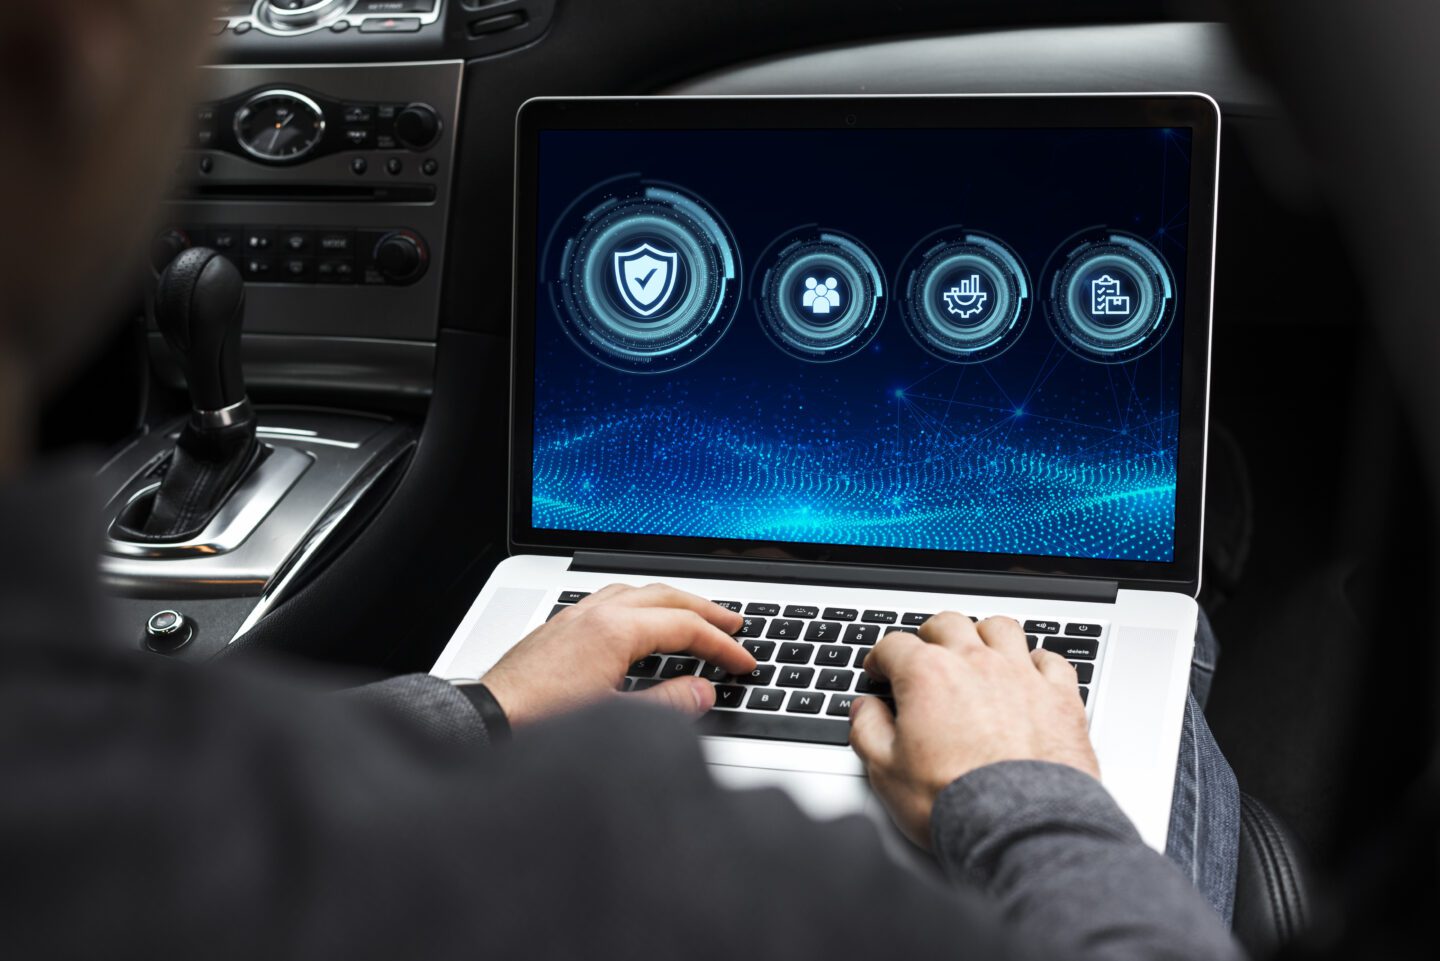 The fundamental role of standardisation in the future of autonomous vehicle cybersecurity